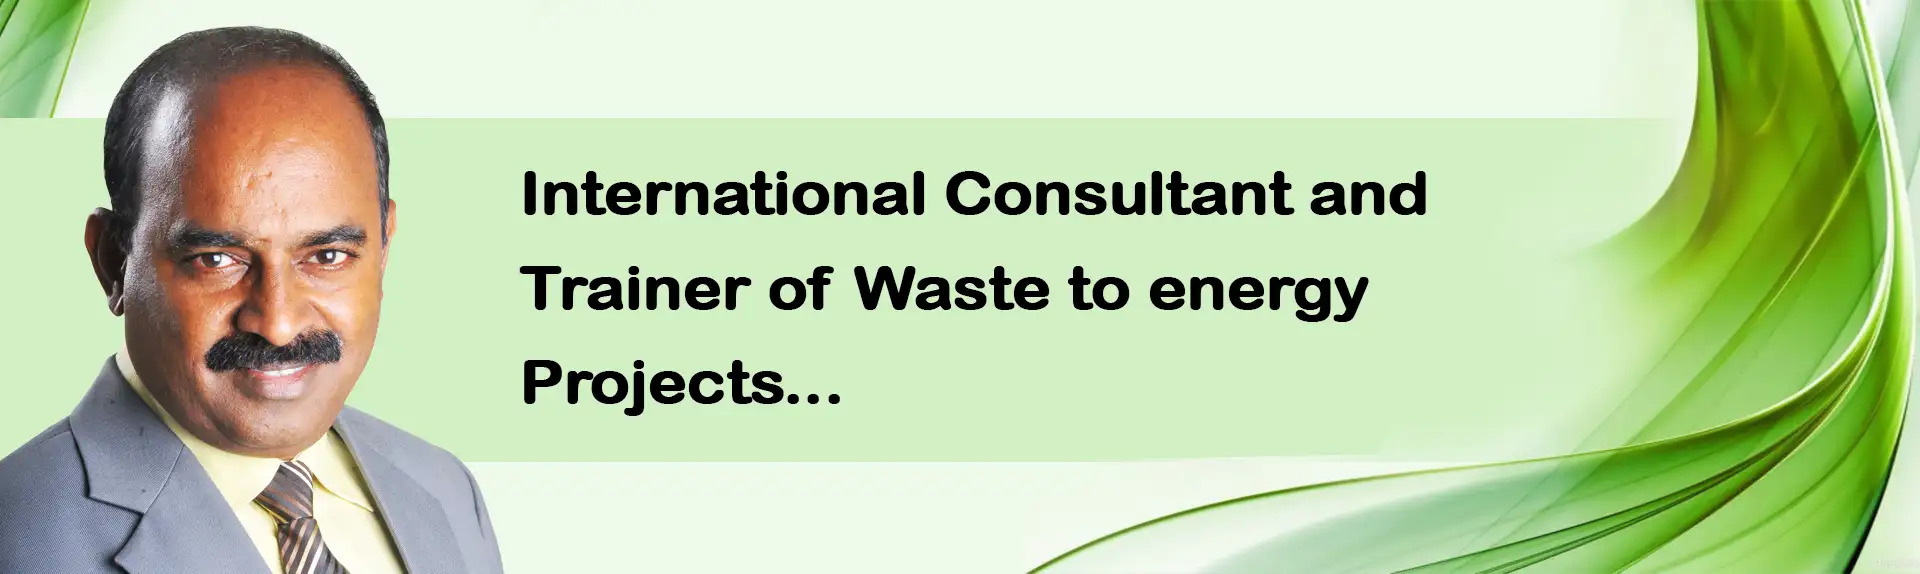 International consultant and trainer of waste to energy projects